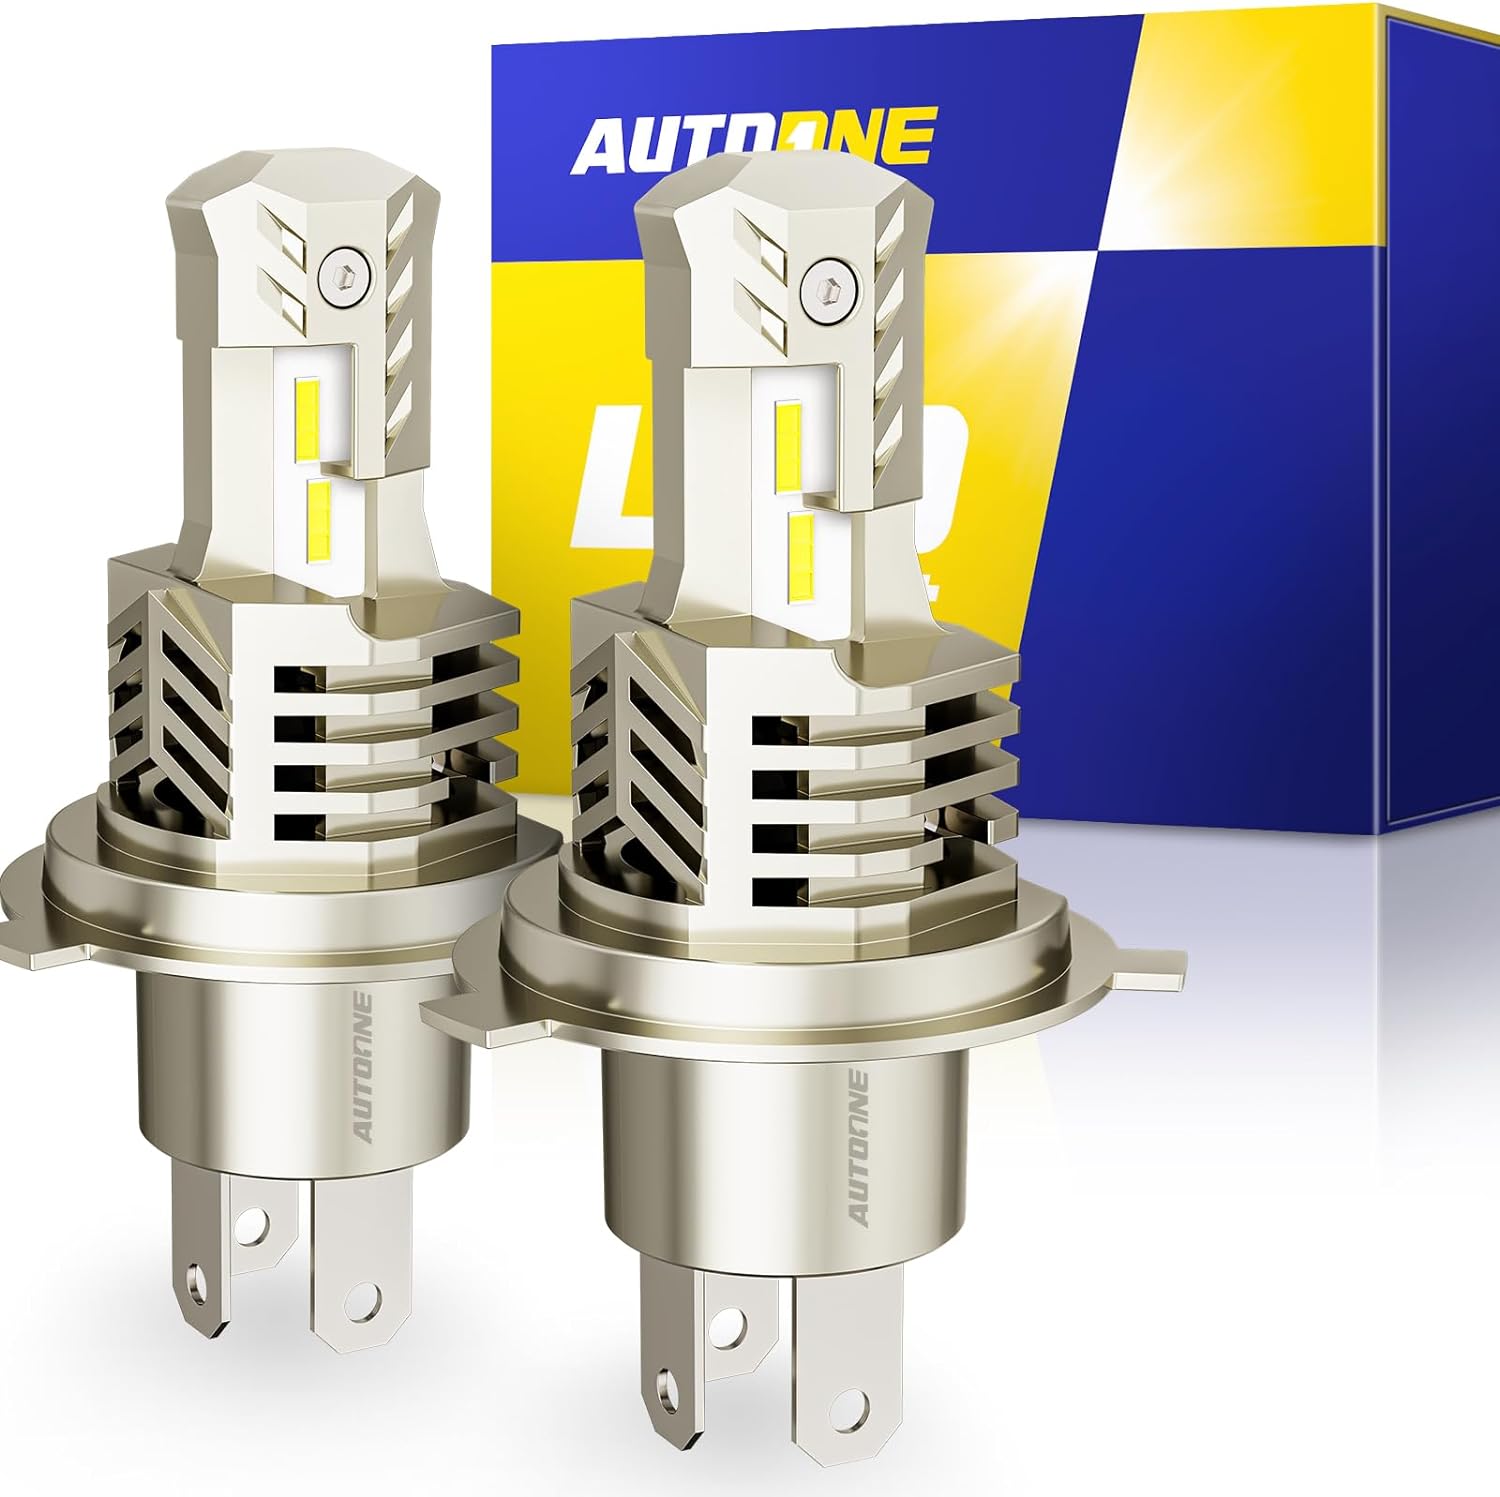 AUTOONE Upgraded H4 LED Bulbs Mini Size Super Bright - Limited-Time Specials!